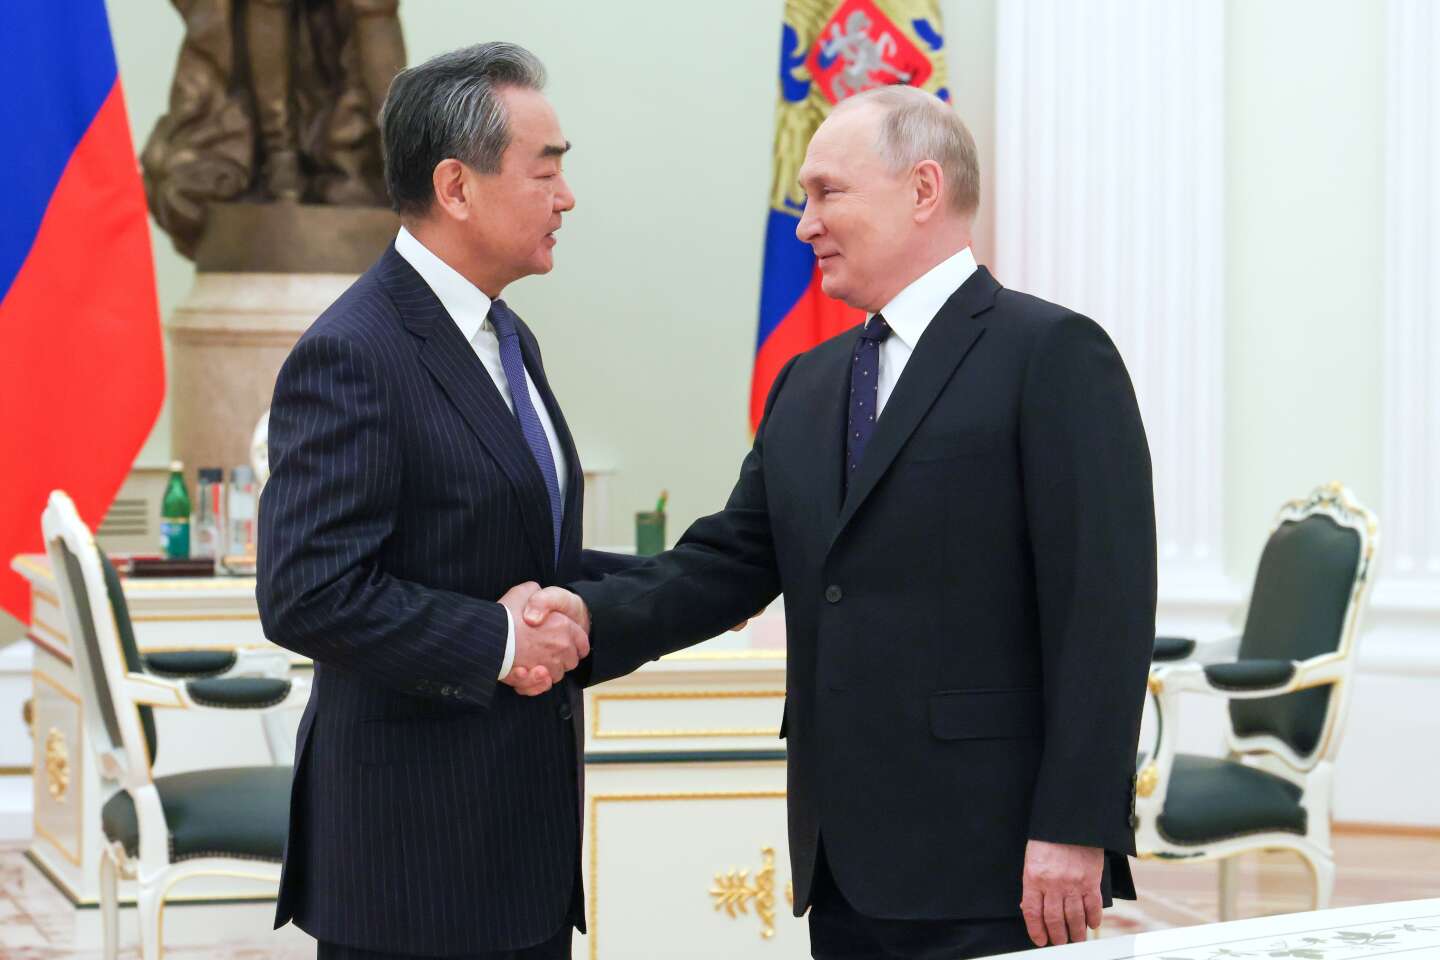 Russia and China are further strengthening their relations